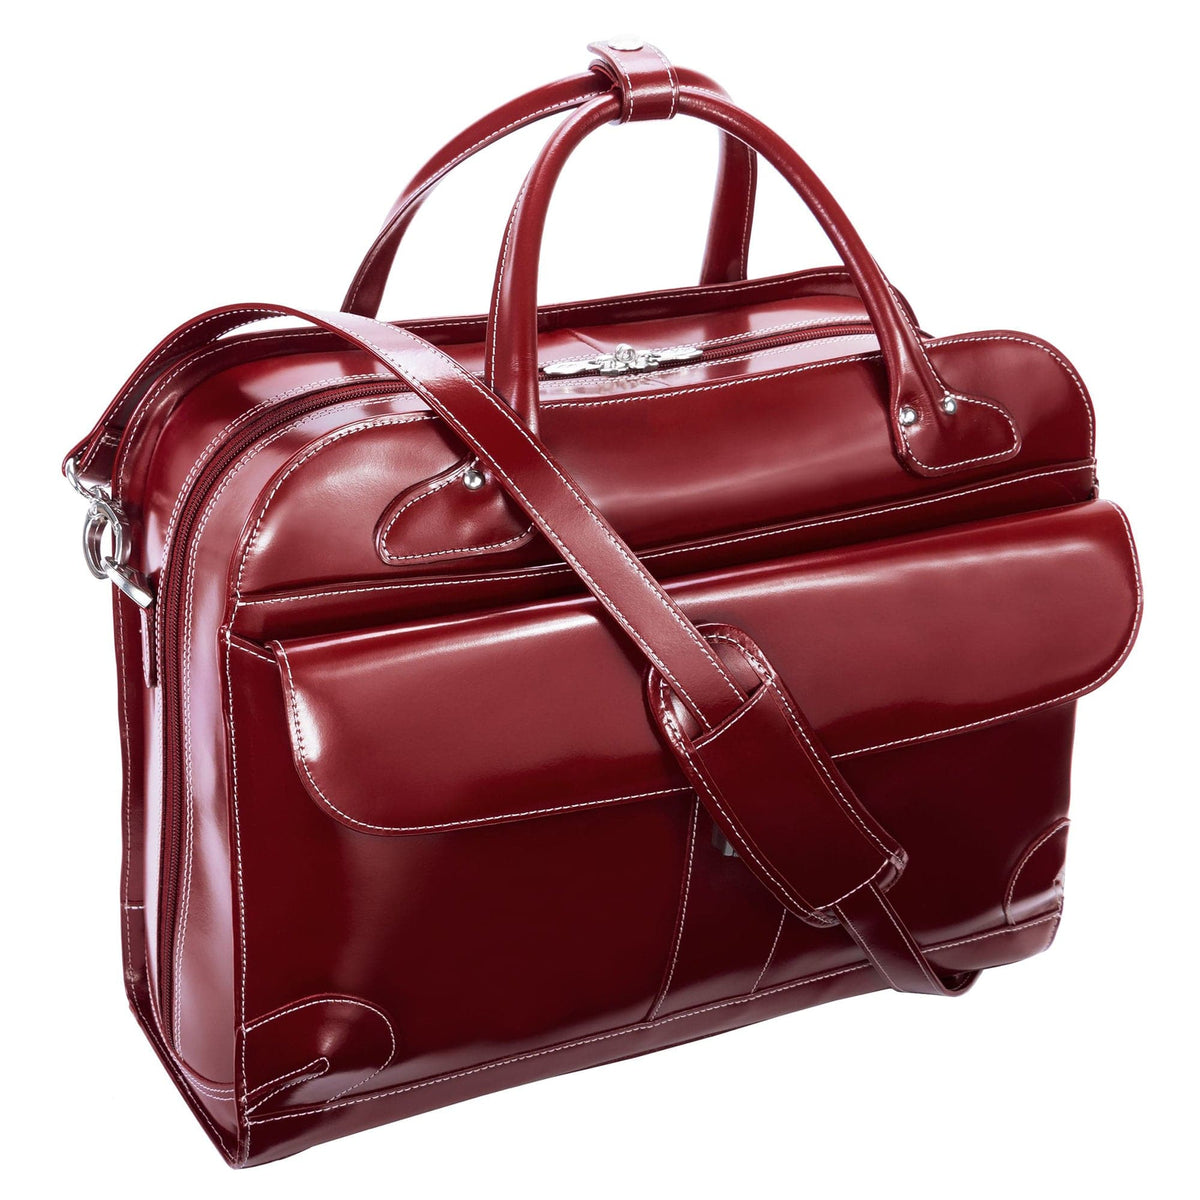 McKlein USA Lakewood 15" Leather Fly-Through Checkpoint-Friendly Patented Detachable -Wheeled Ladies' Laptop Briefcase